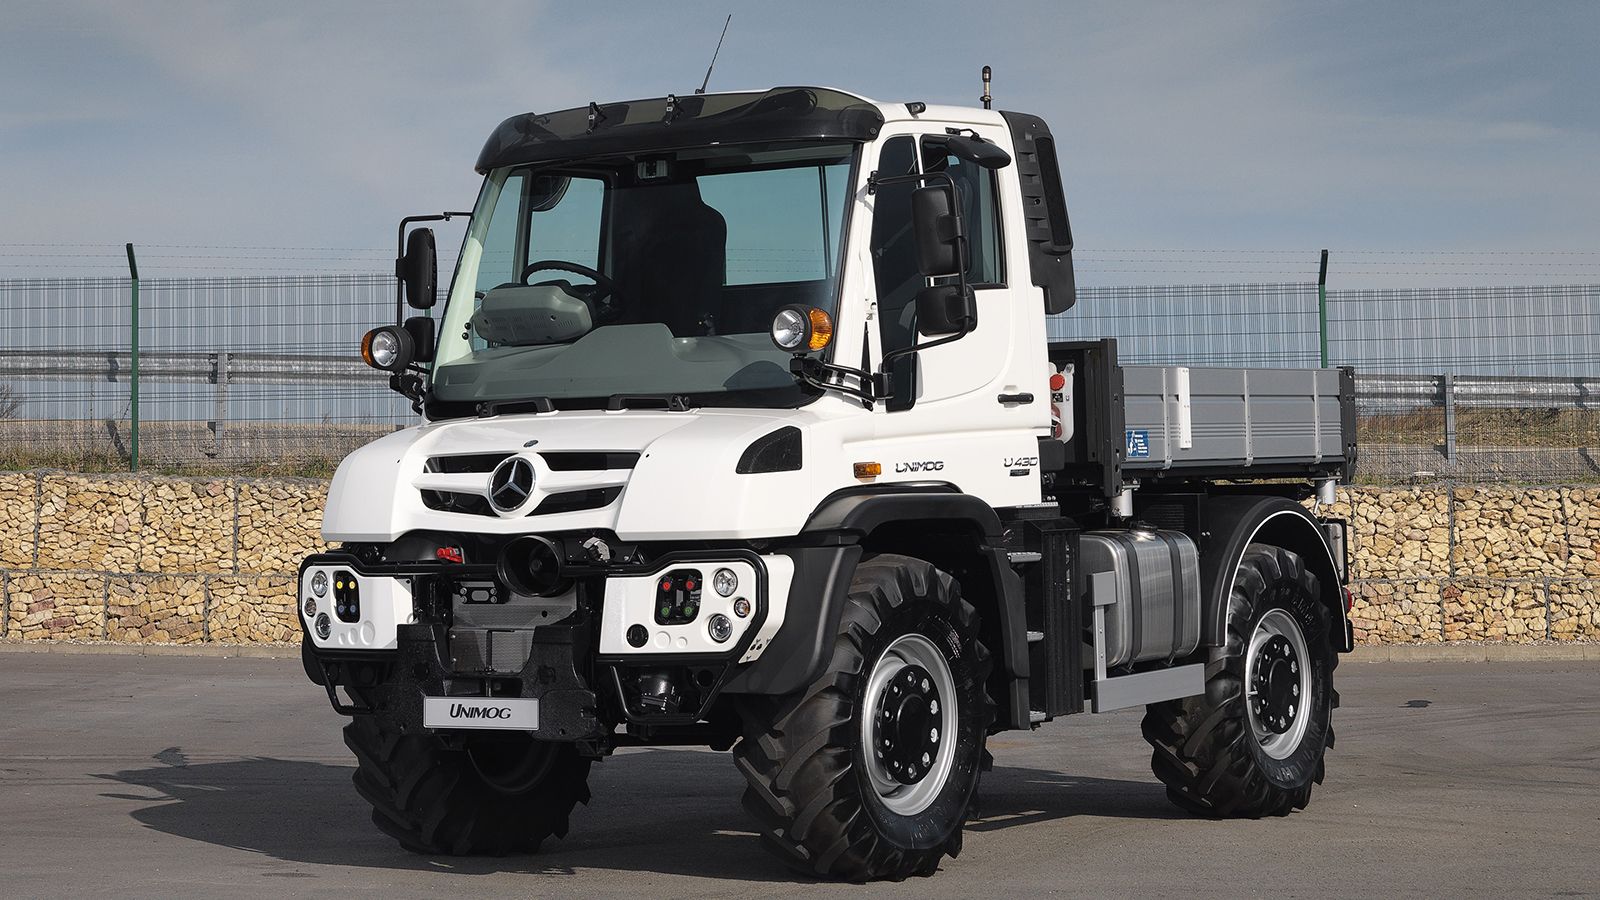 Mercedes Unimog Evolution Shows 12 Generations Of Go-Anywhere